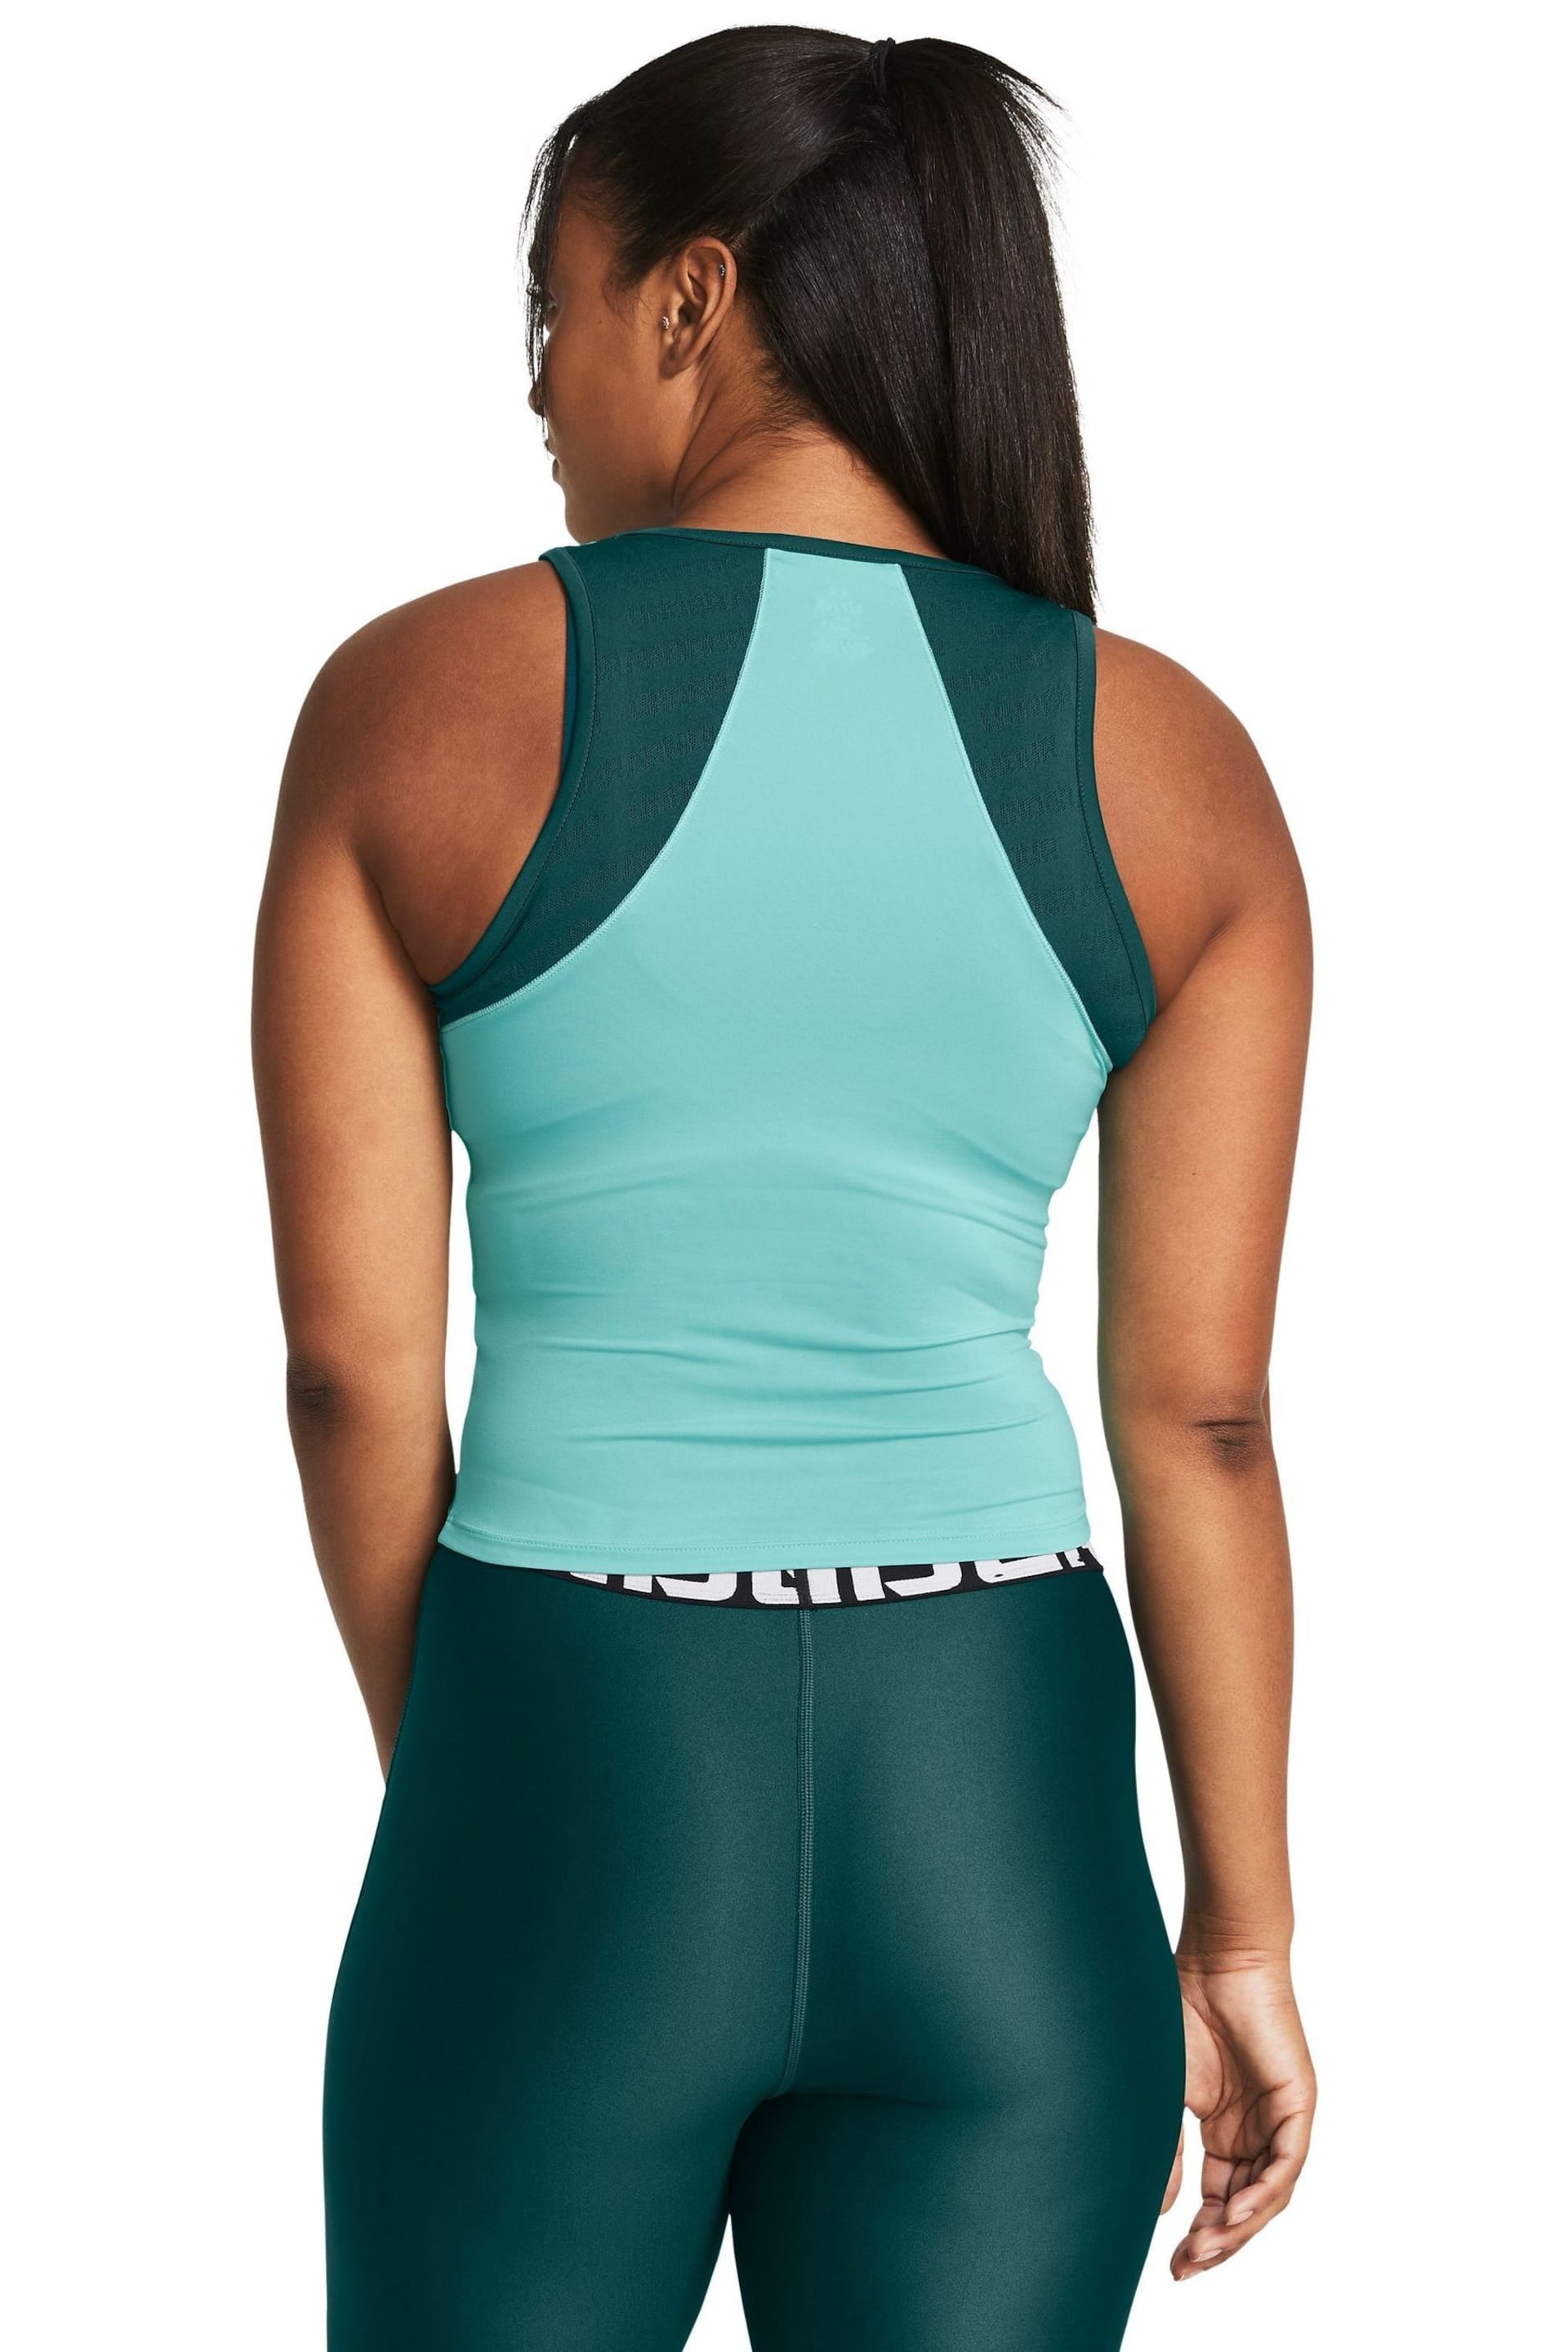 Under Armour Green Womens Heat Gear Authentics Leggings - Image 5 of 8